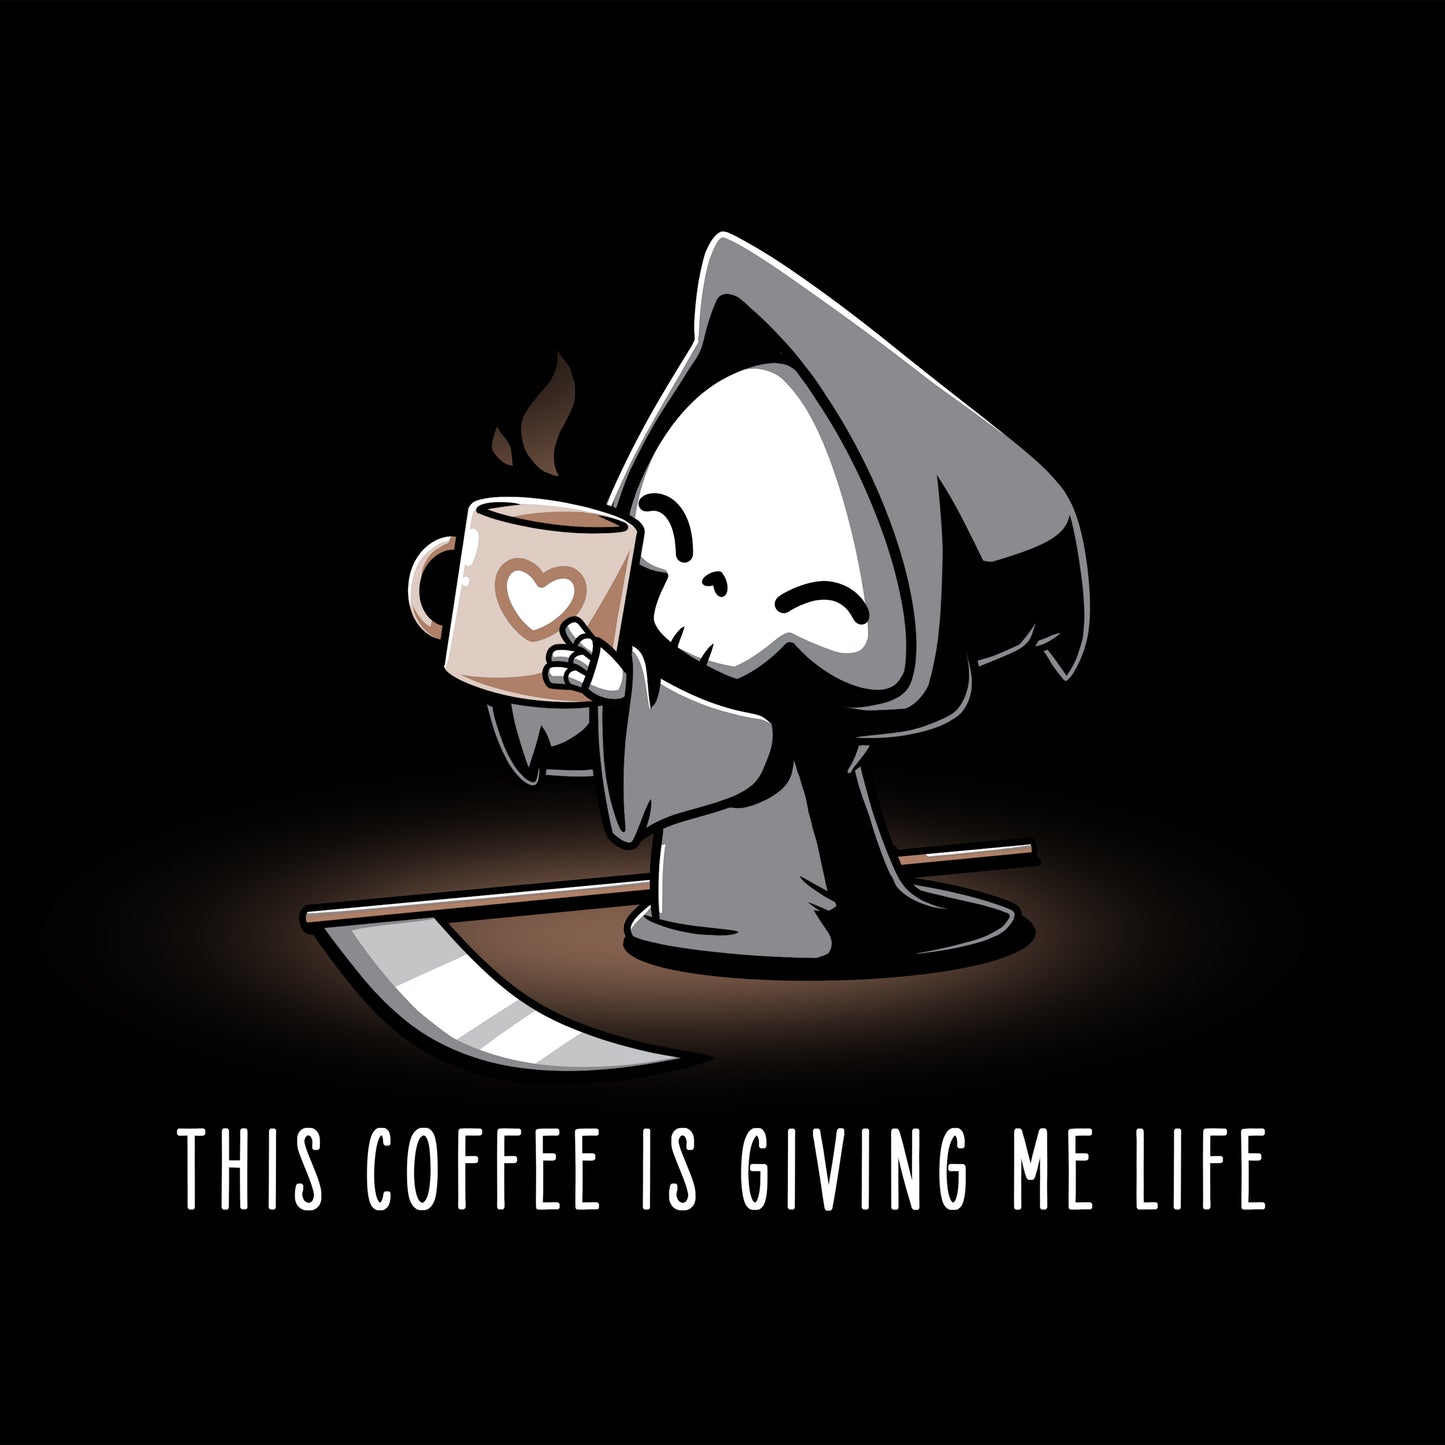 This TeeTurtle "This Coffee Is Giving Me Life" is giving me life.